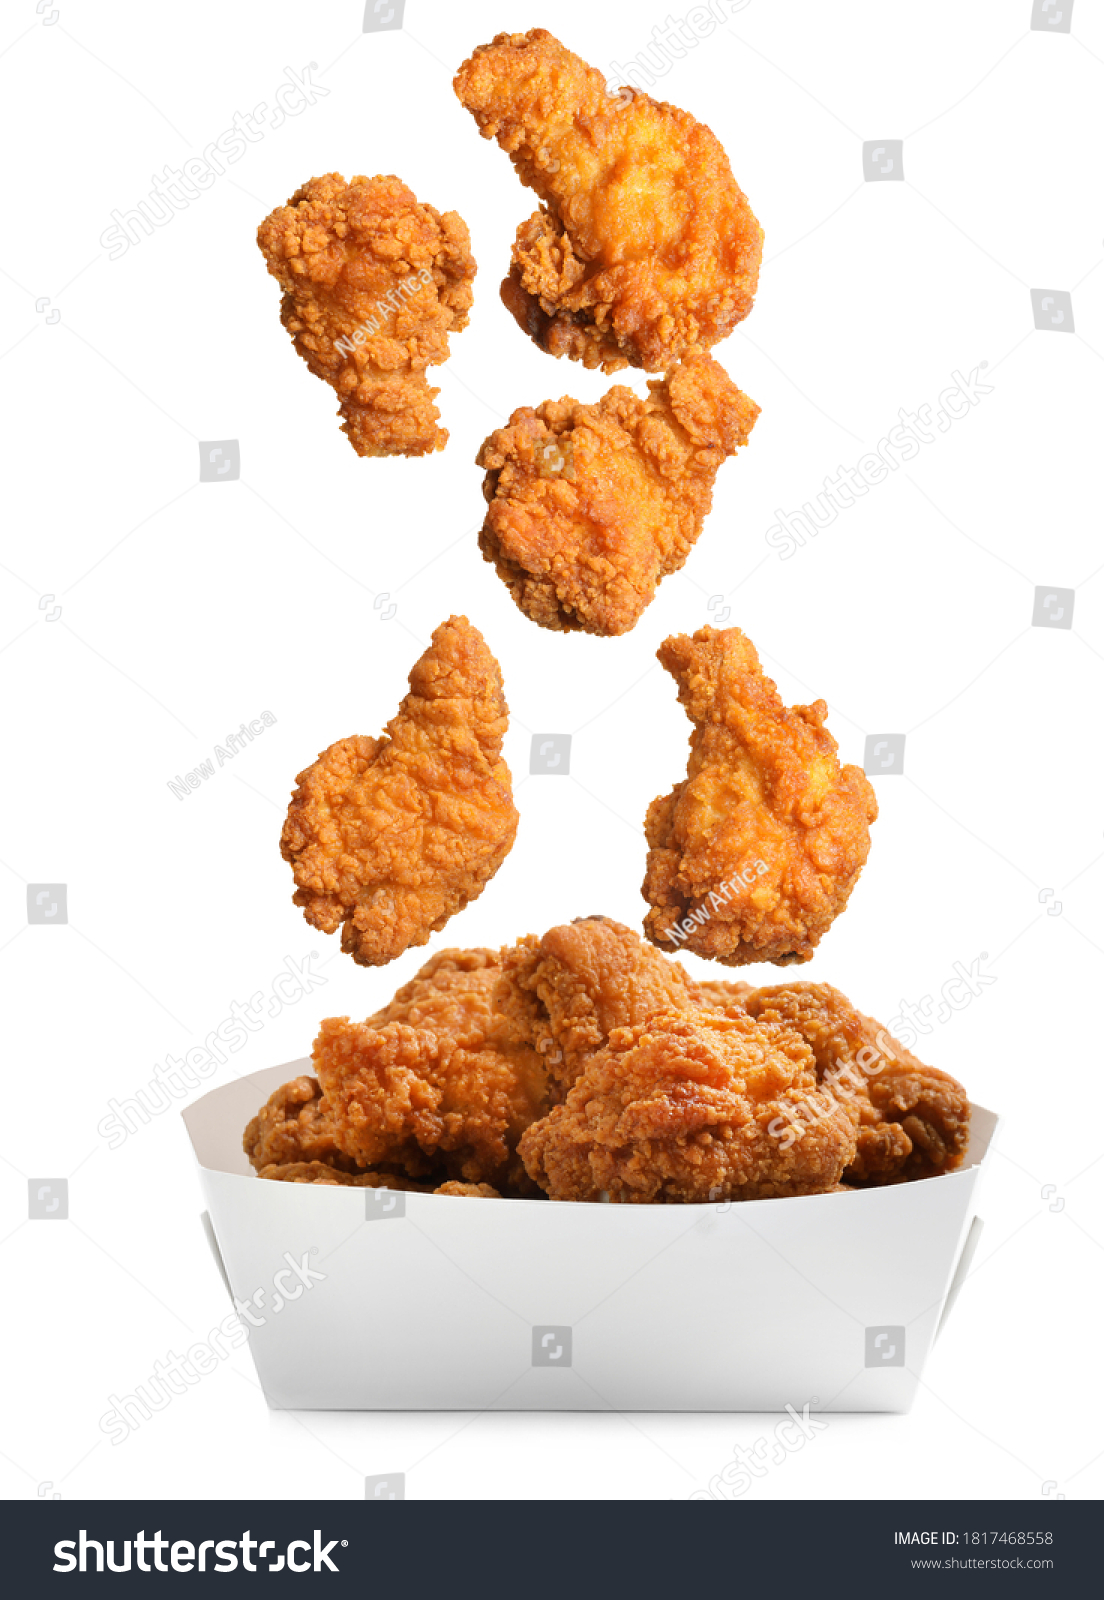 Fresh fried chicken falling into container on white background #1817468558